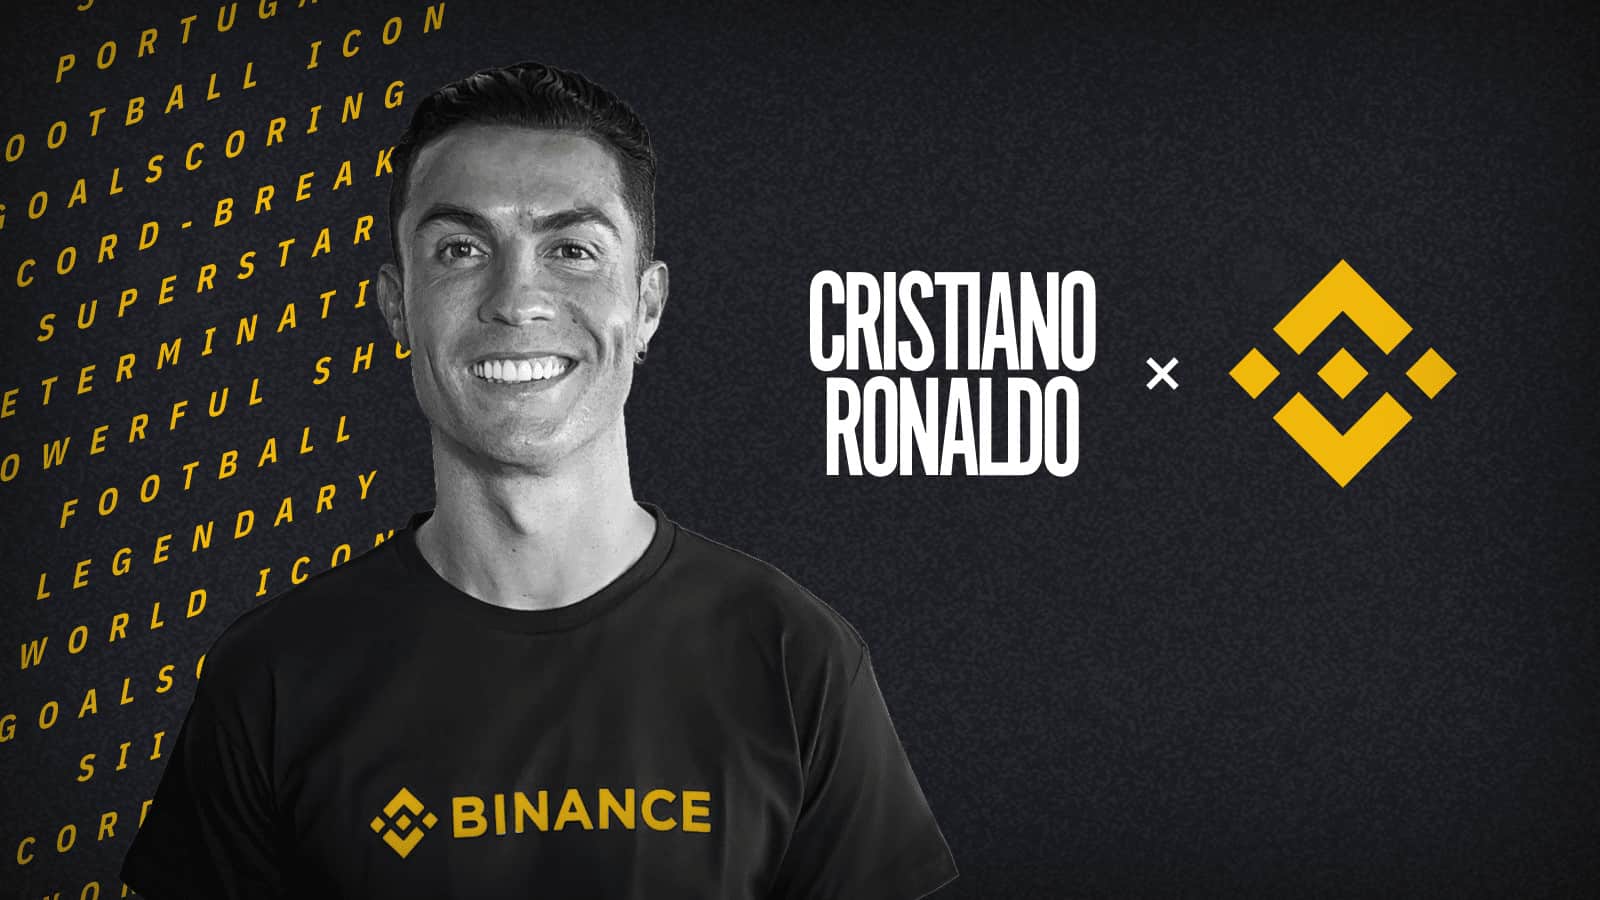 Ronaldo Binance Just In! Binance announces a multi-year partnership with the GOAT Christiano Ronaldo. Binance announced this on their Twitter and CR7 retweeted. 